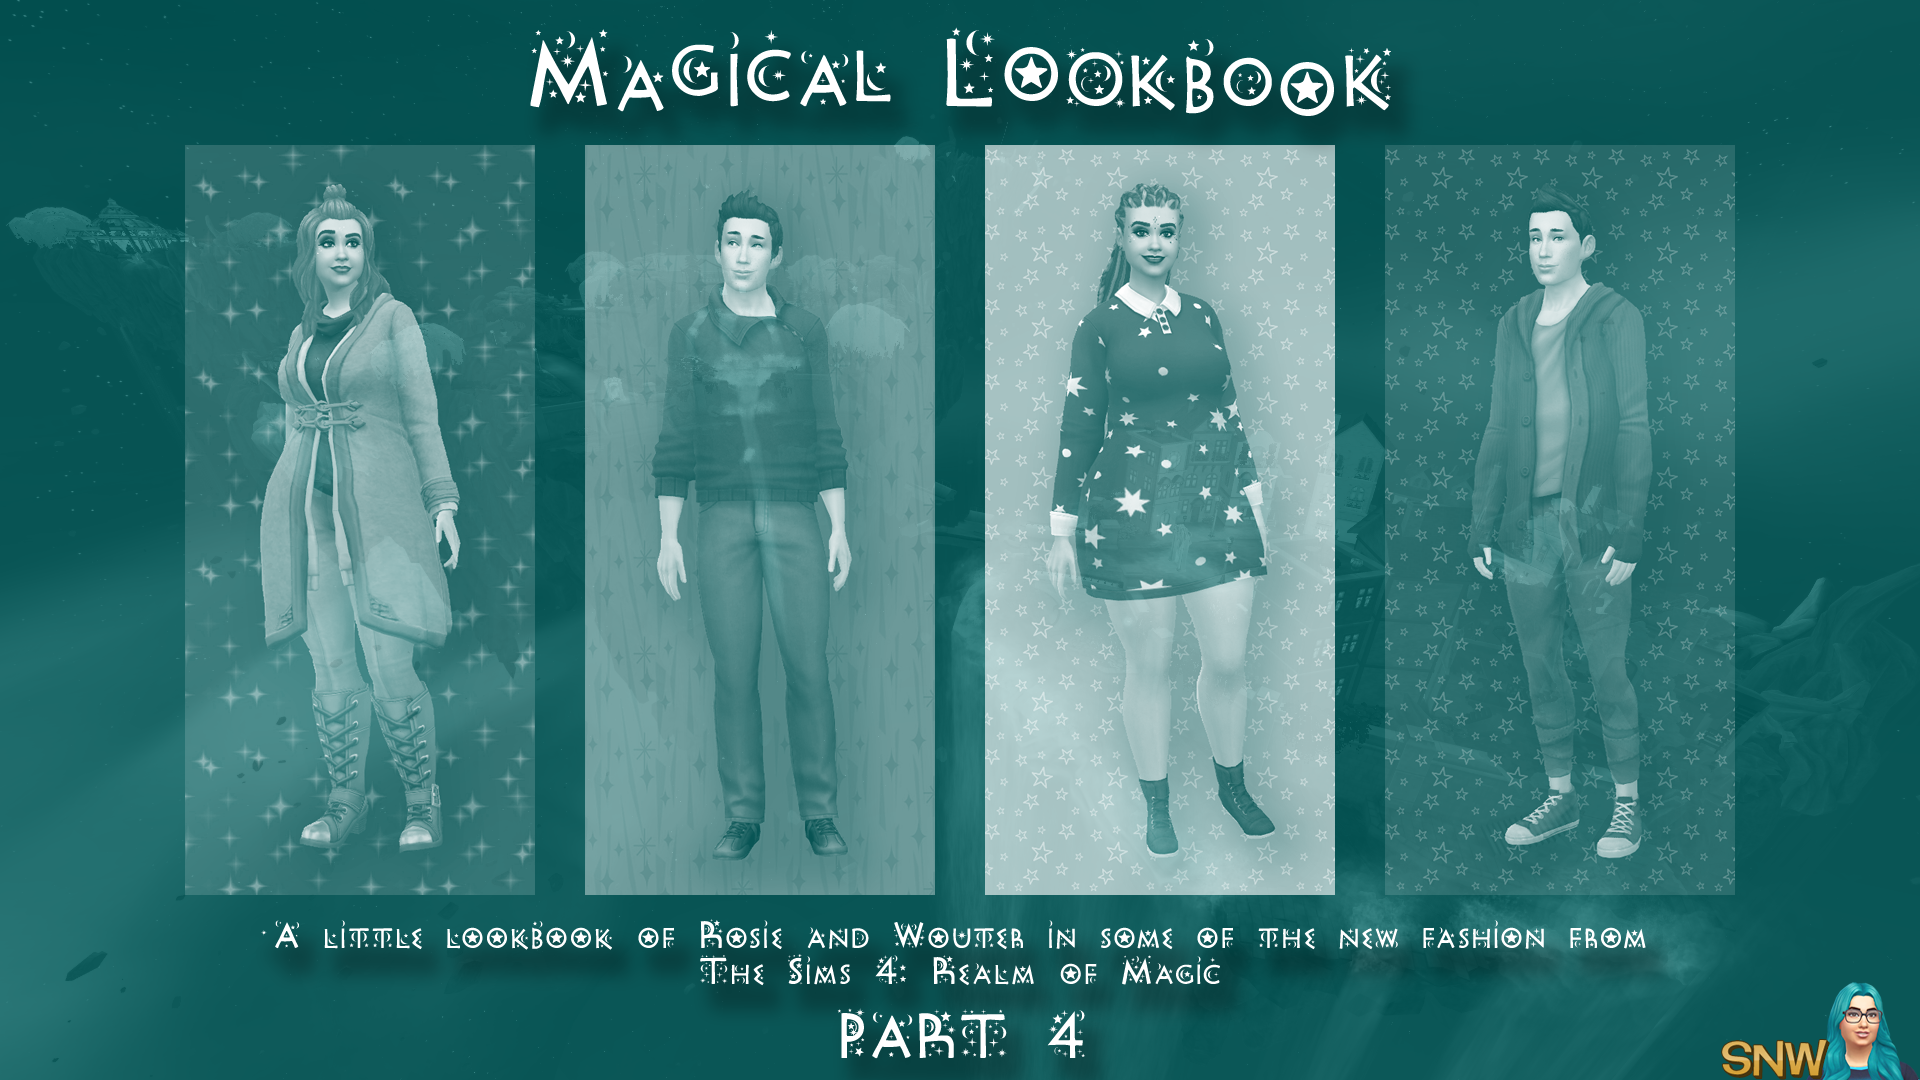 The Sims 4: Realm of Magic - A Little Lookbook by Rosie and Cheetah - Part 4